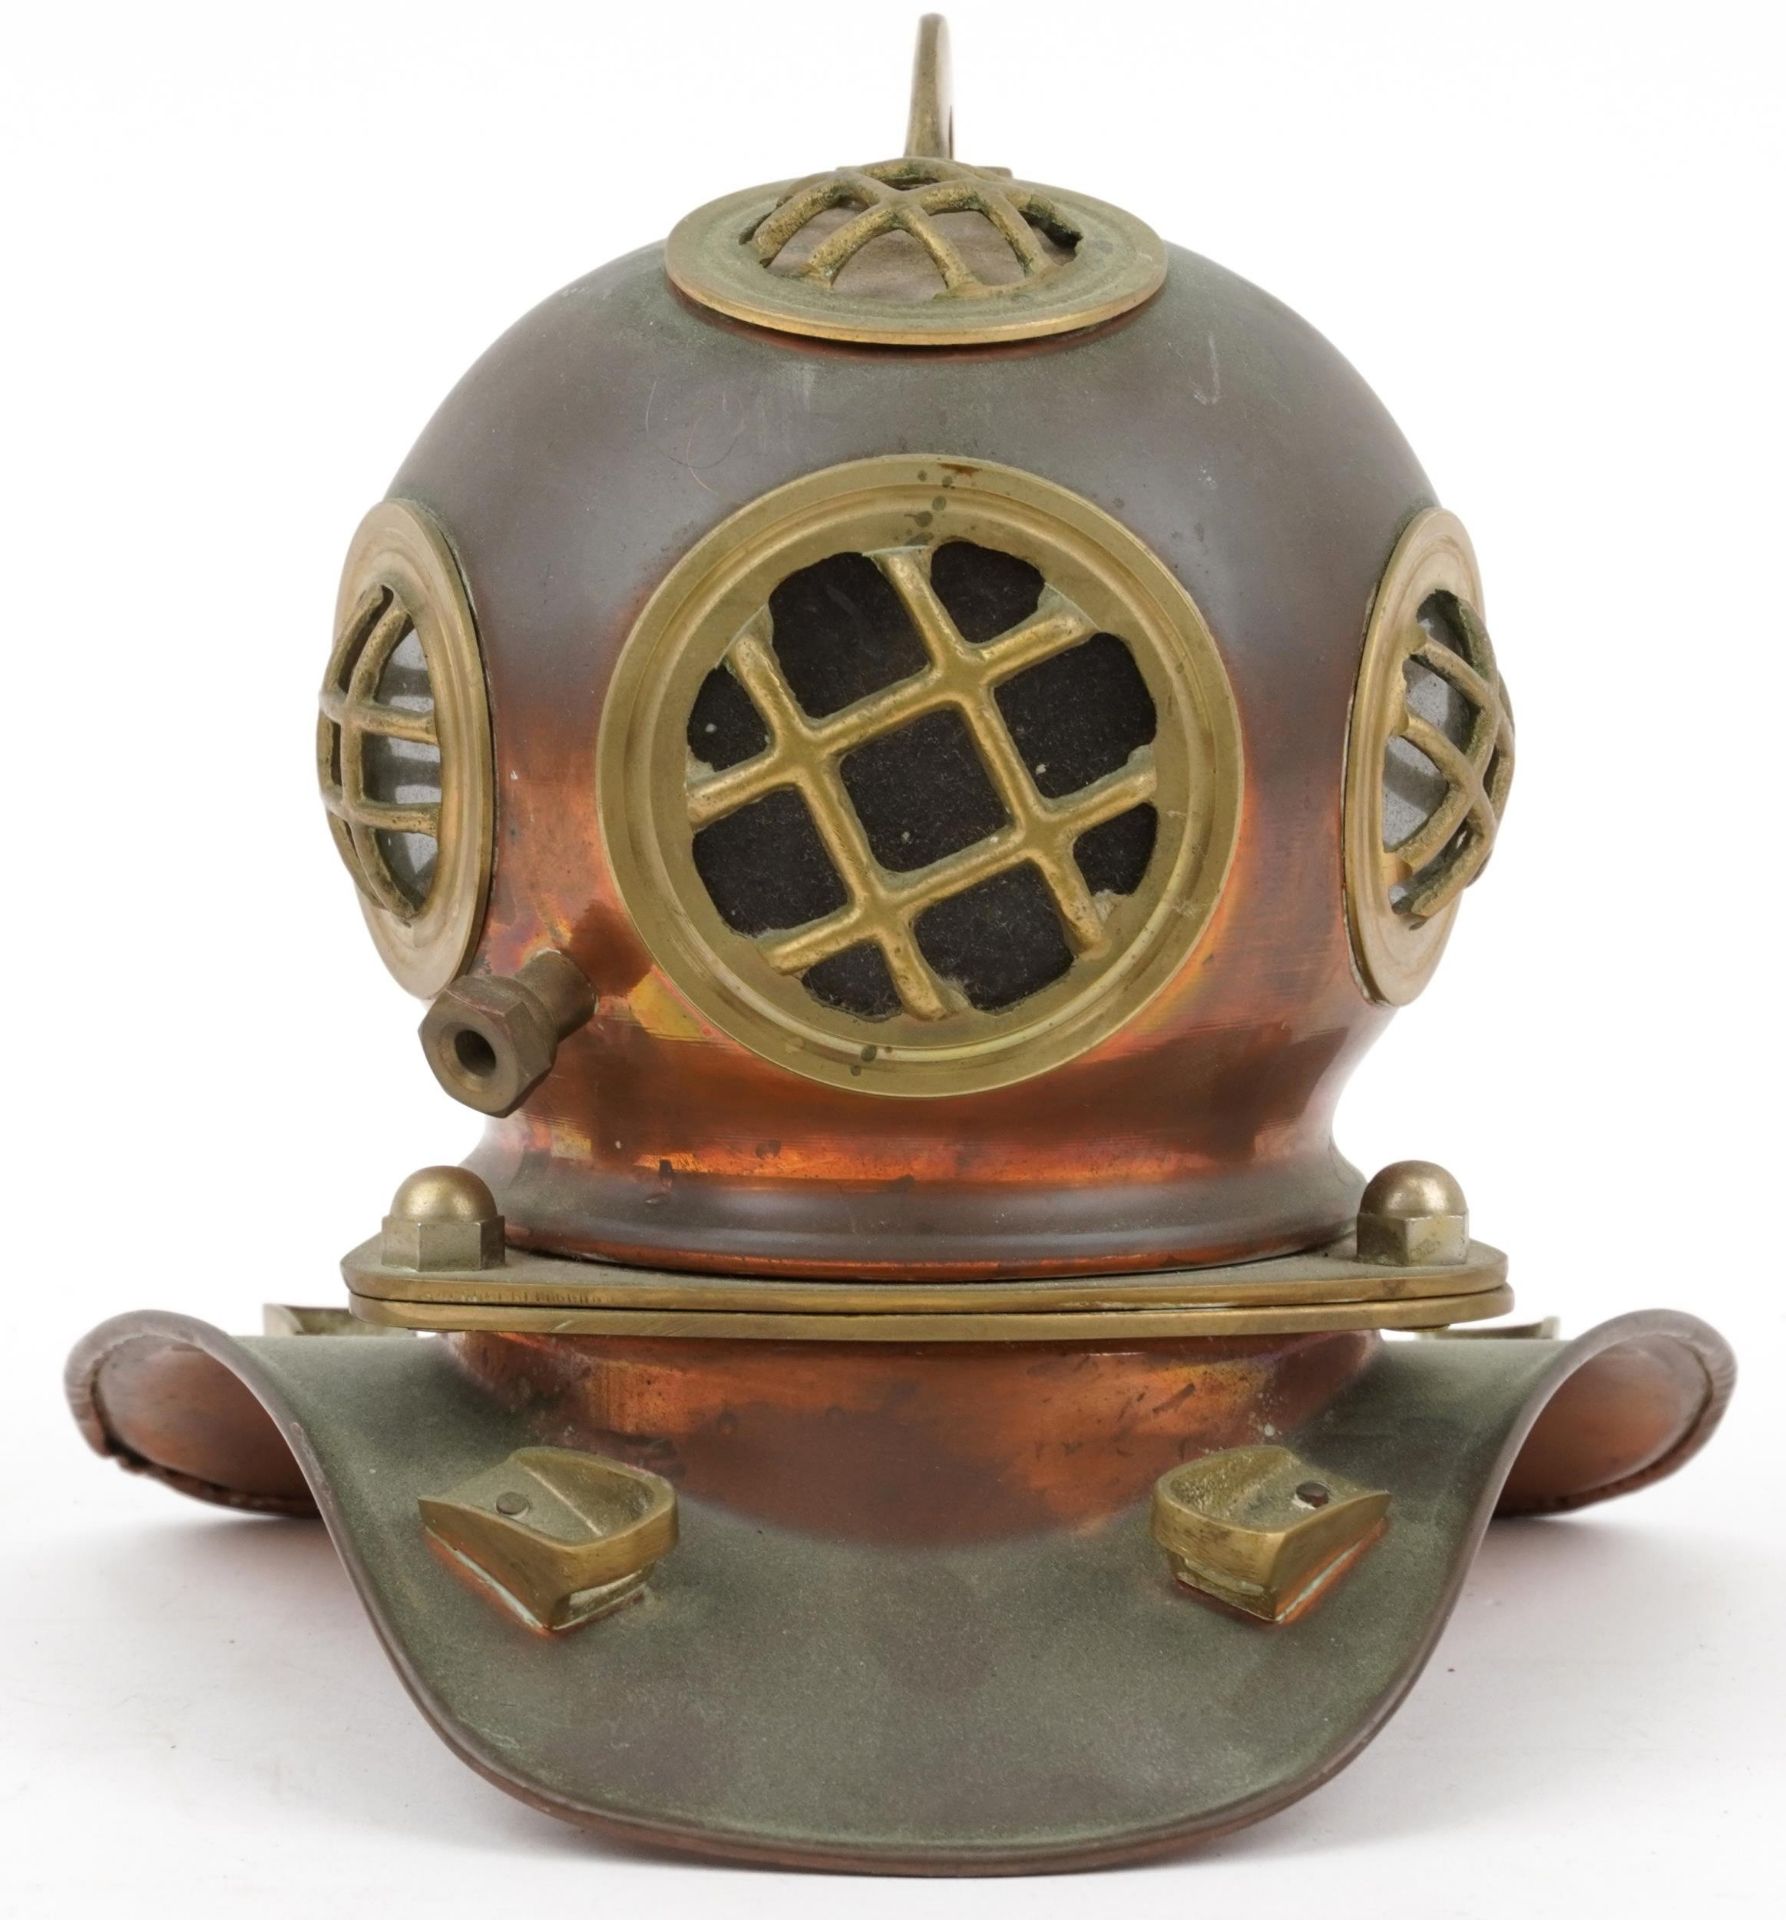 Miniature copper and brass model of a diver's helmet, 17.5cm high : For further information on